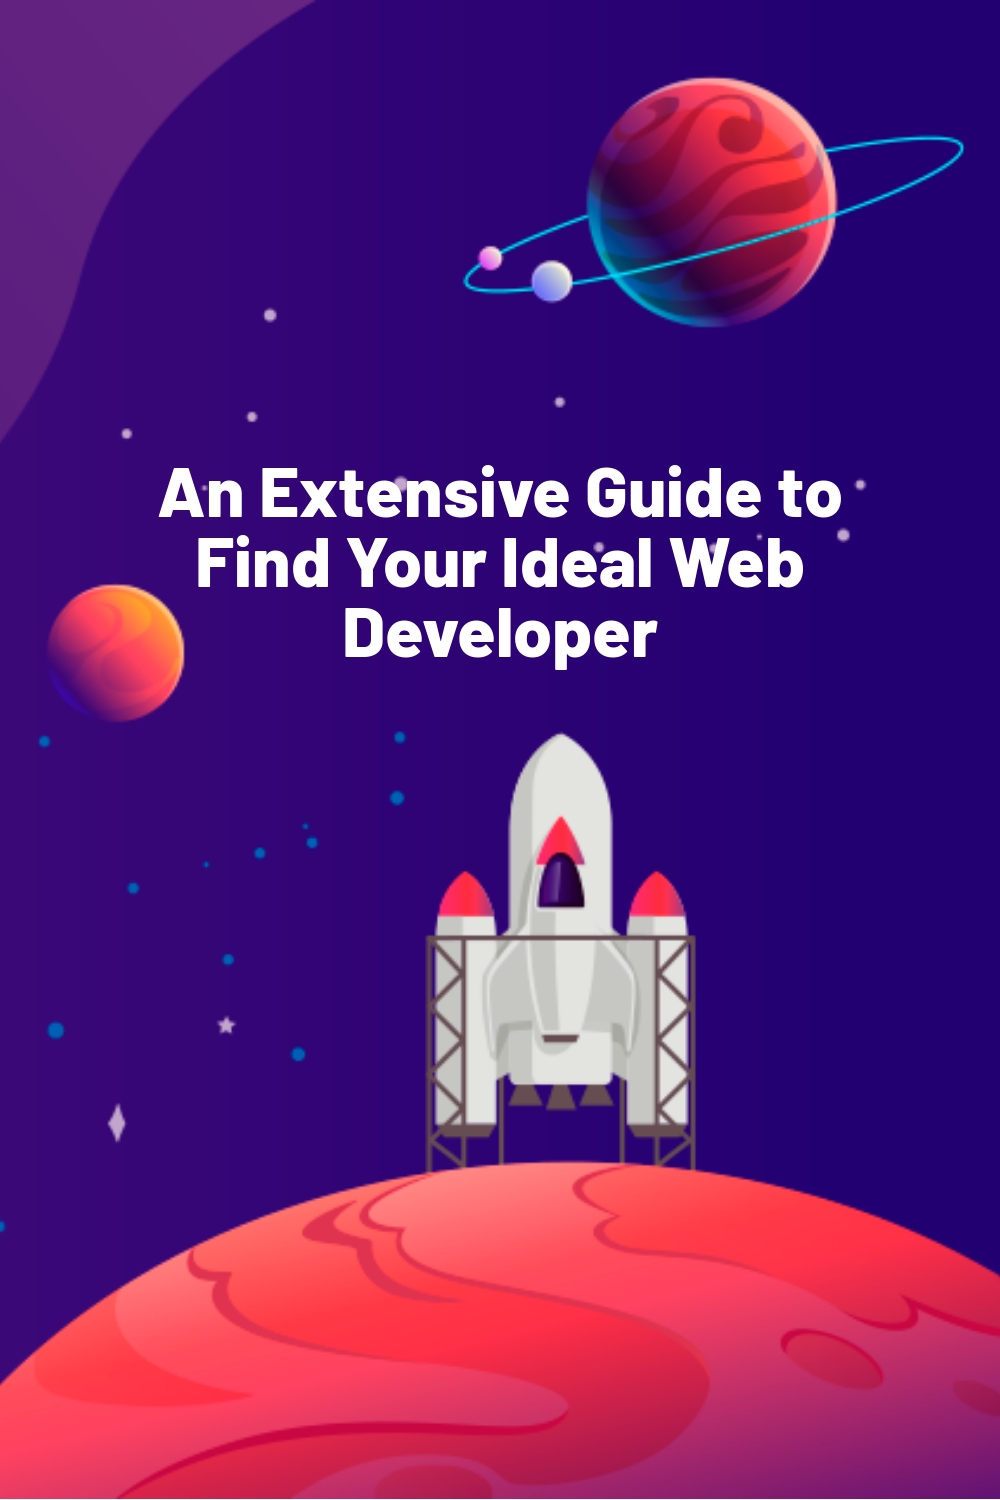 An Extensive Guide to Find Your Ideal Web Developer